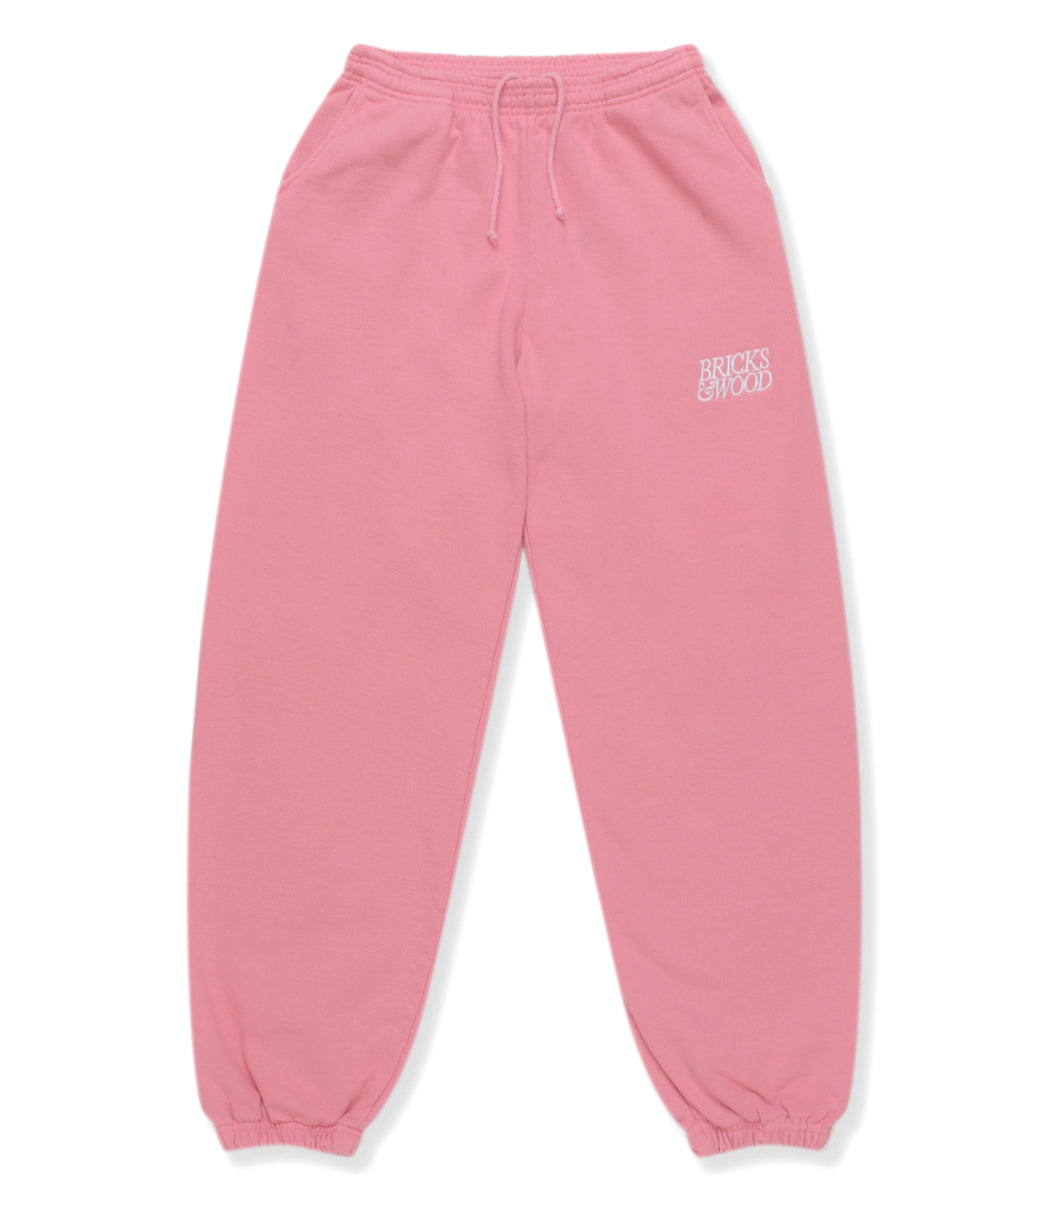 https://cdn.shopify.com/s/files/1/1133/9738/products/LOGOSWEATPANTSPINK_1.jpg?v=1659413204